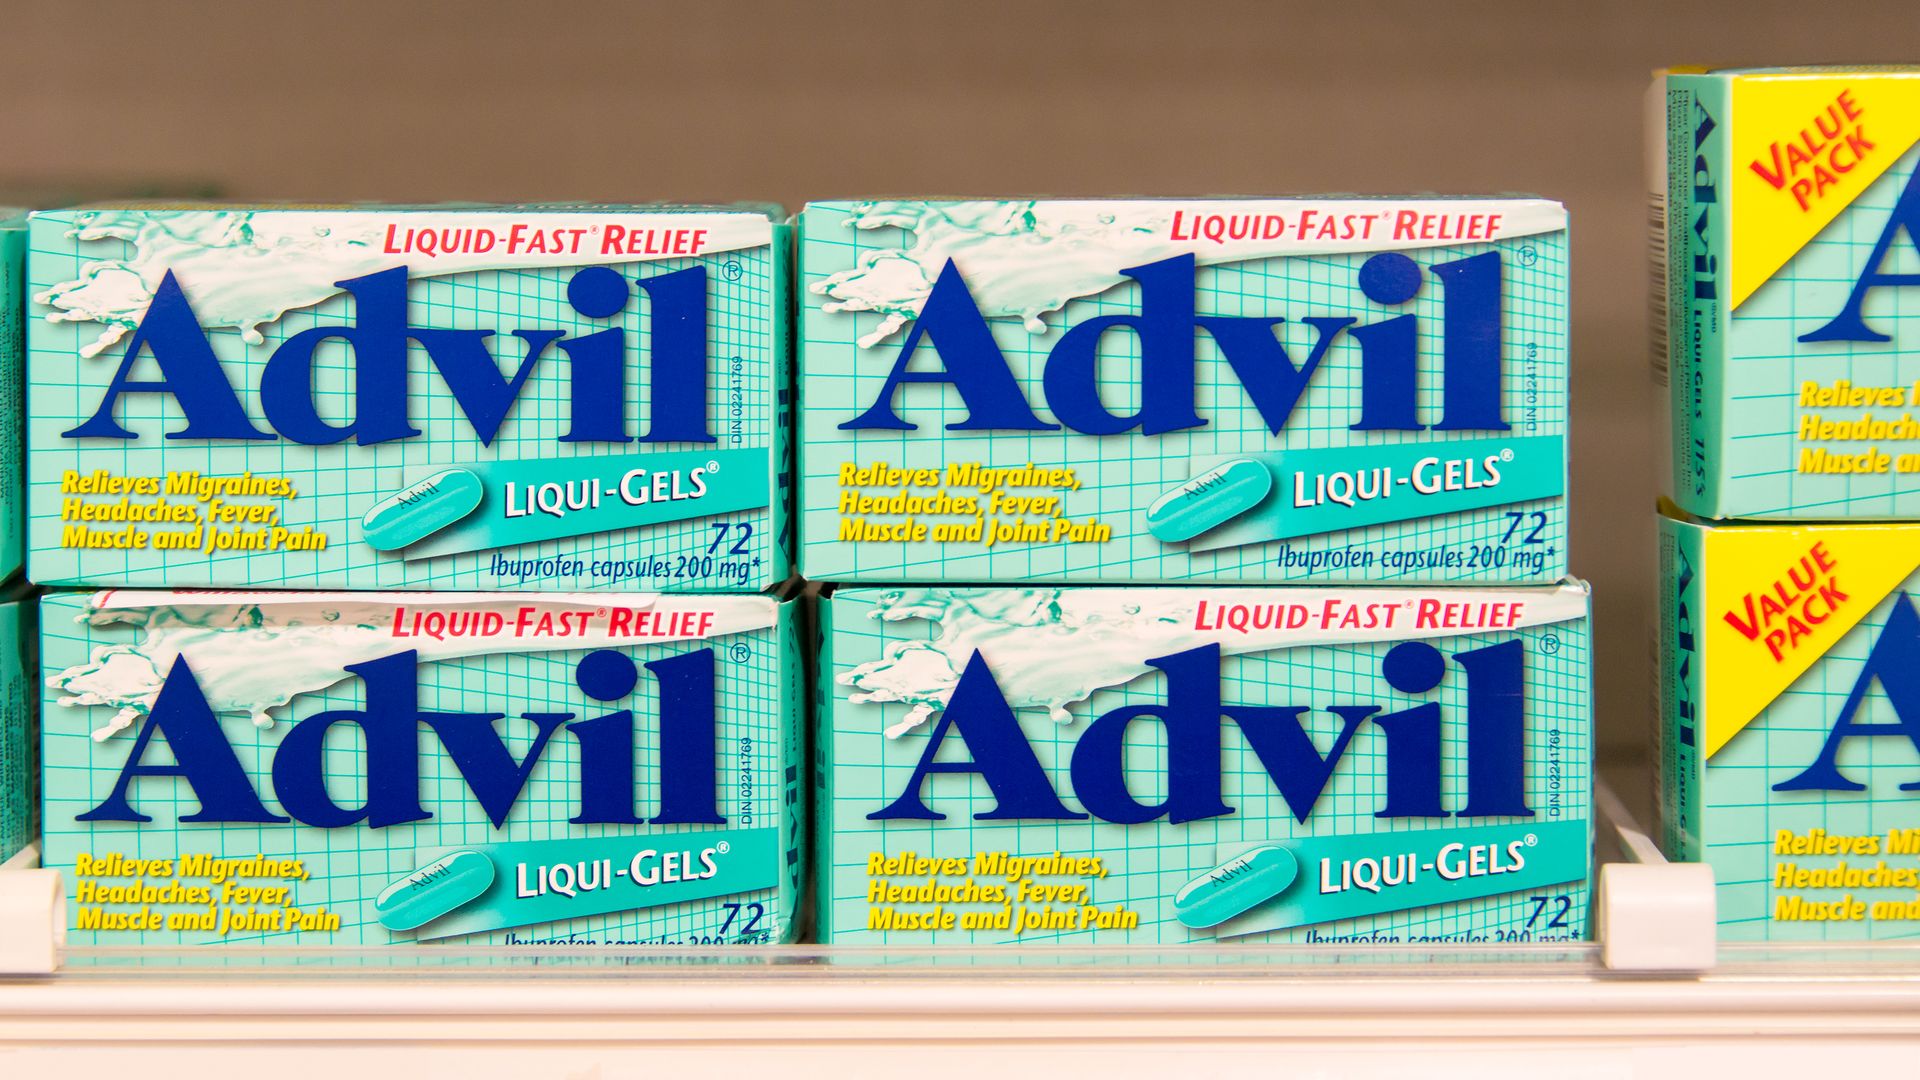 Advil packages sit on a shelf.